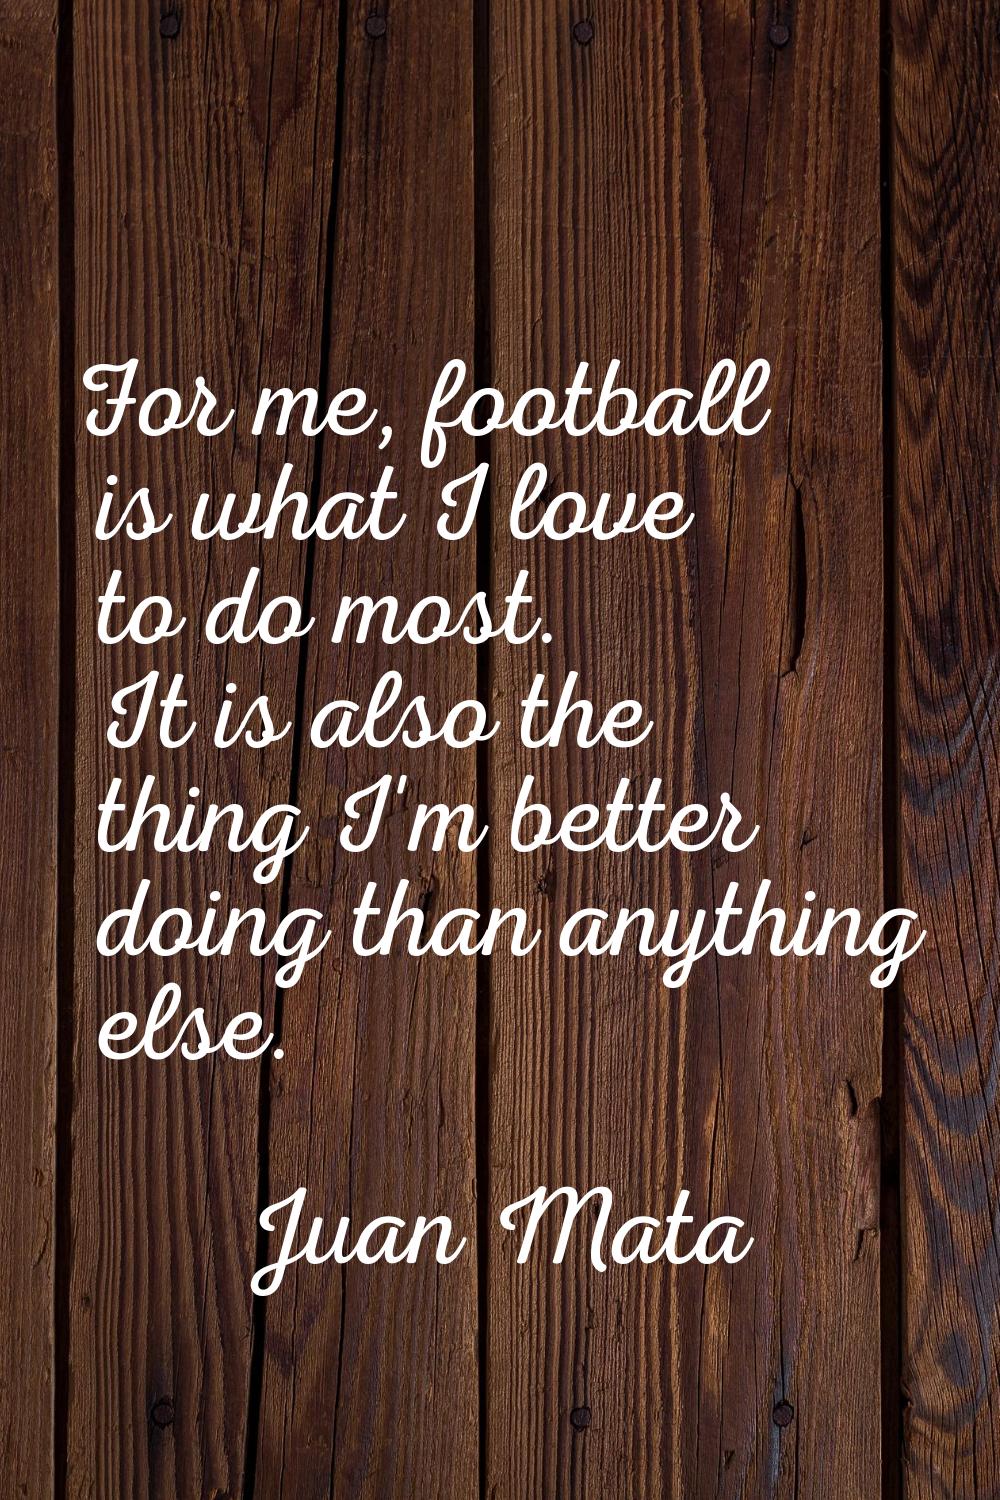 For me, football is what I love to do most. It is also the thing I'm better doing than anything els